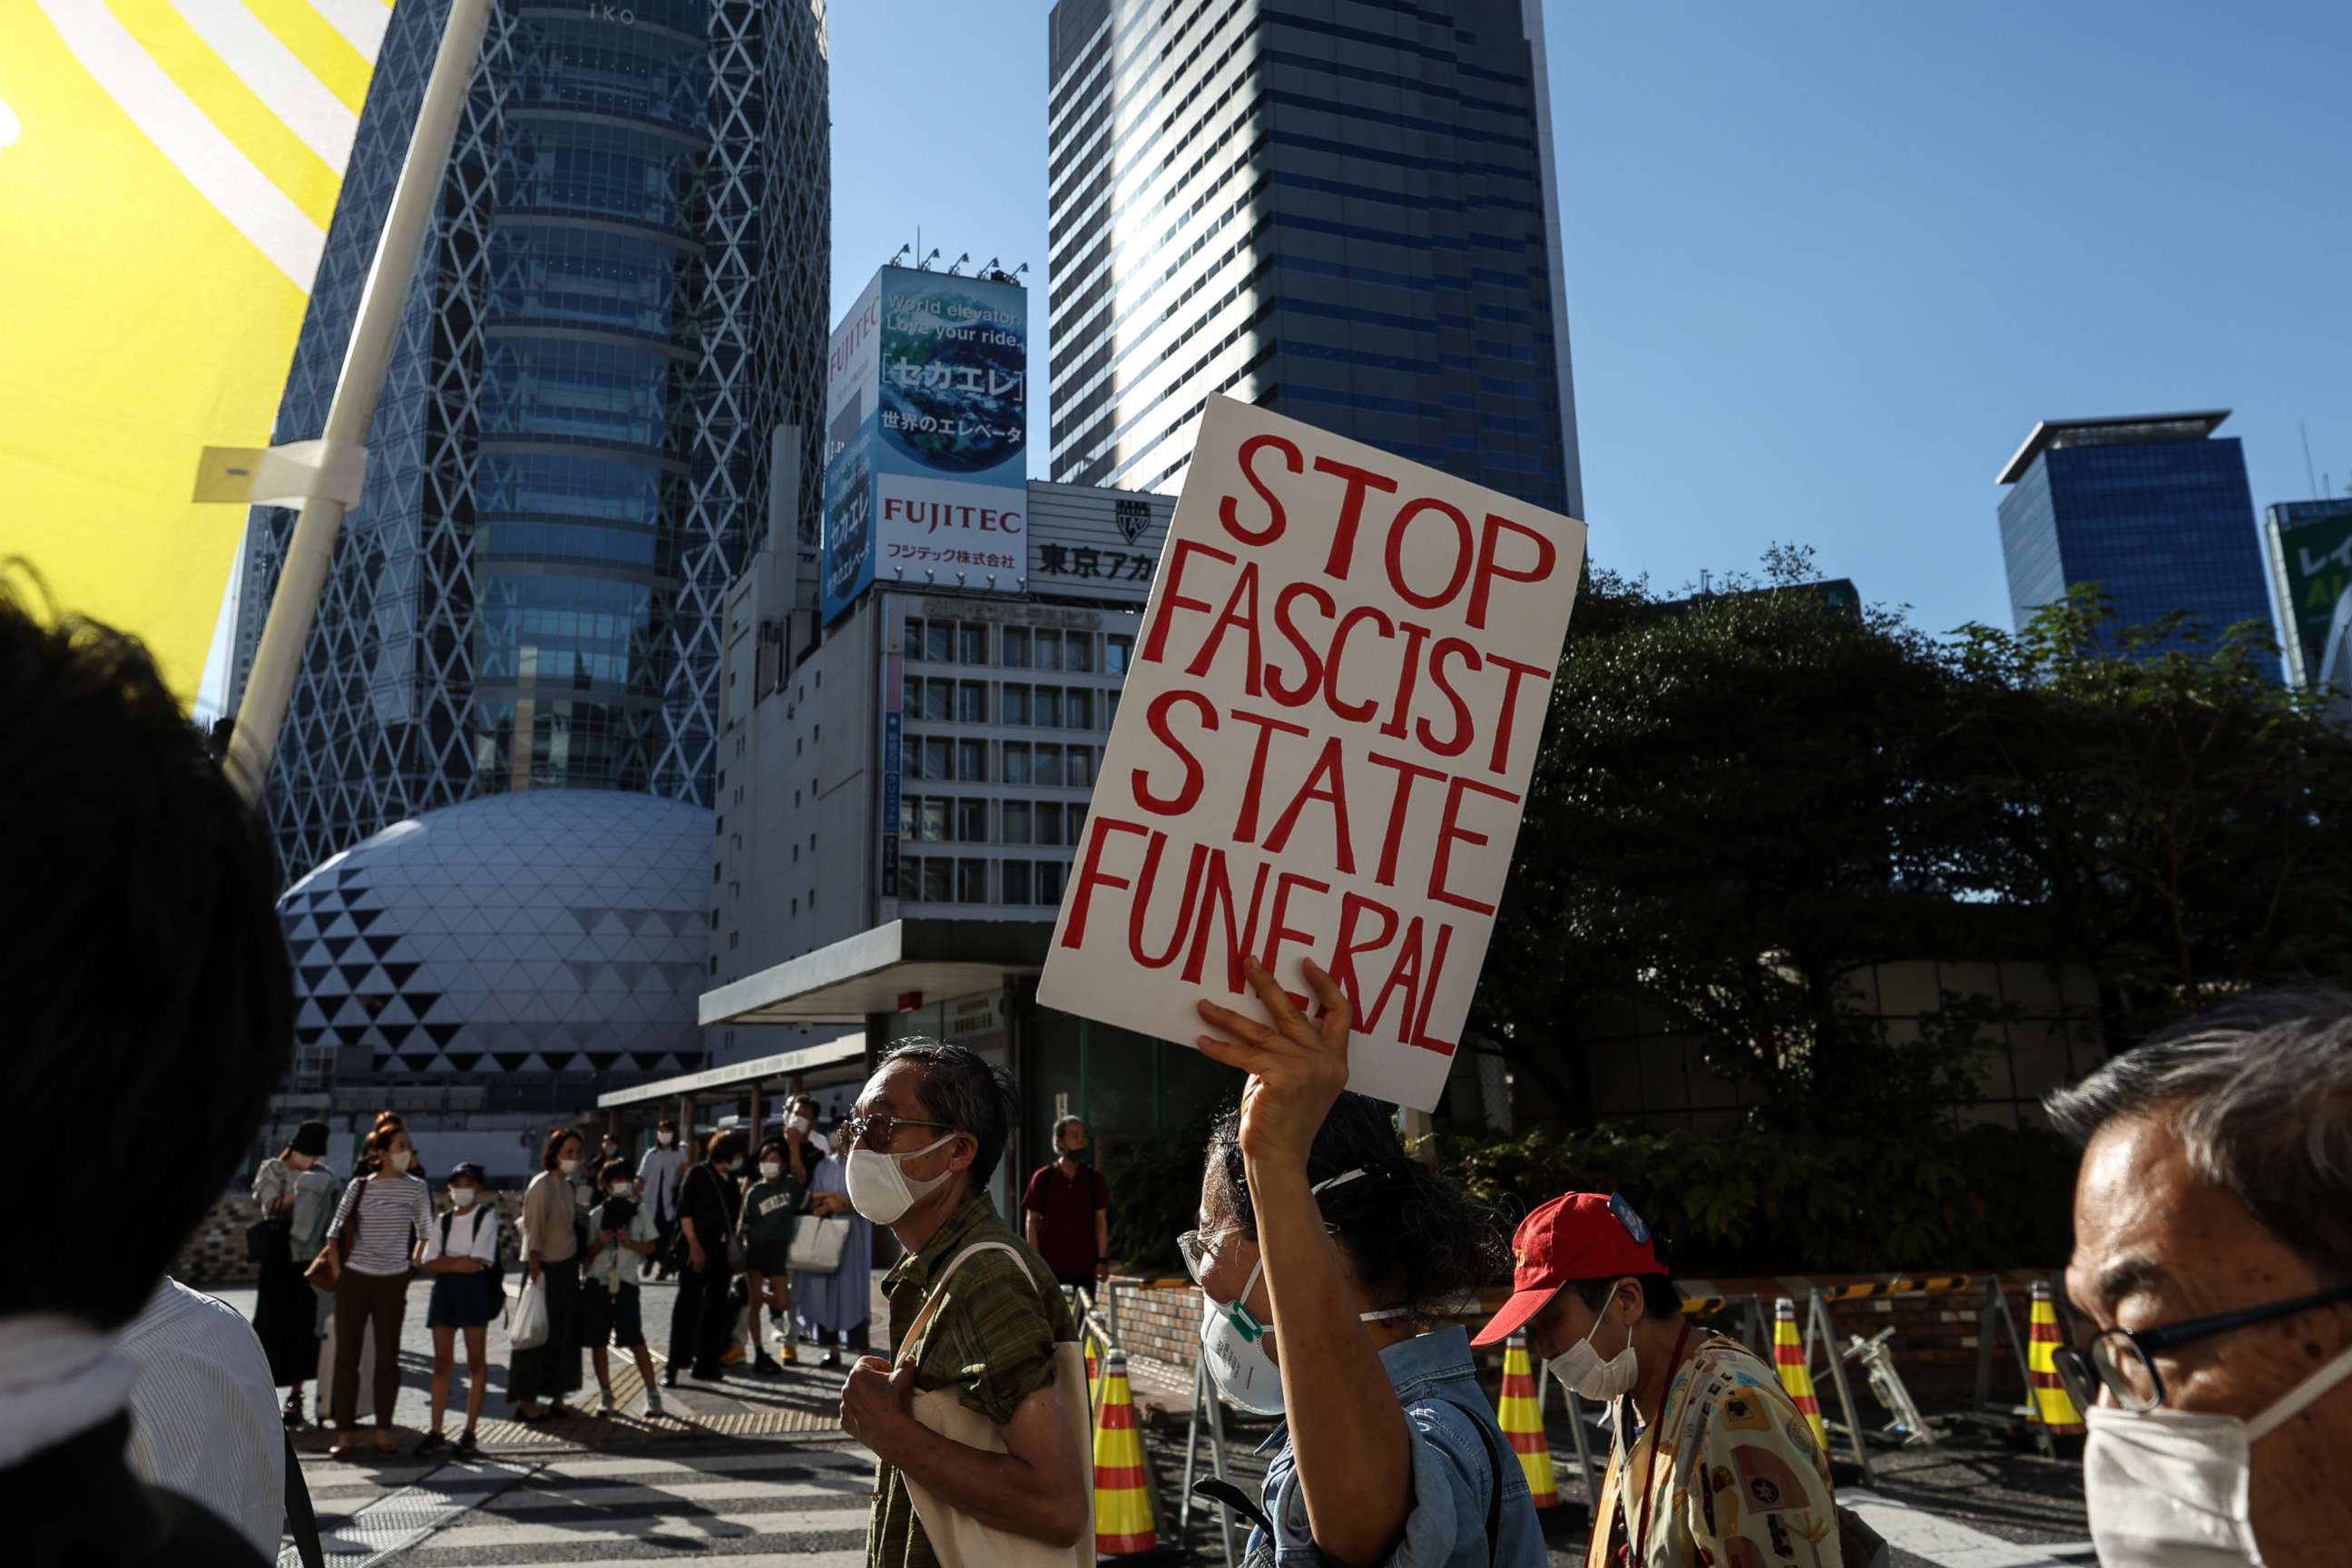 PHOTO: People hold signs and chant slogans during the march to protest against Shinzo Abe's State Funeral, on Sept. 25, 2022, in Tokyo, Japan